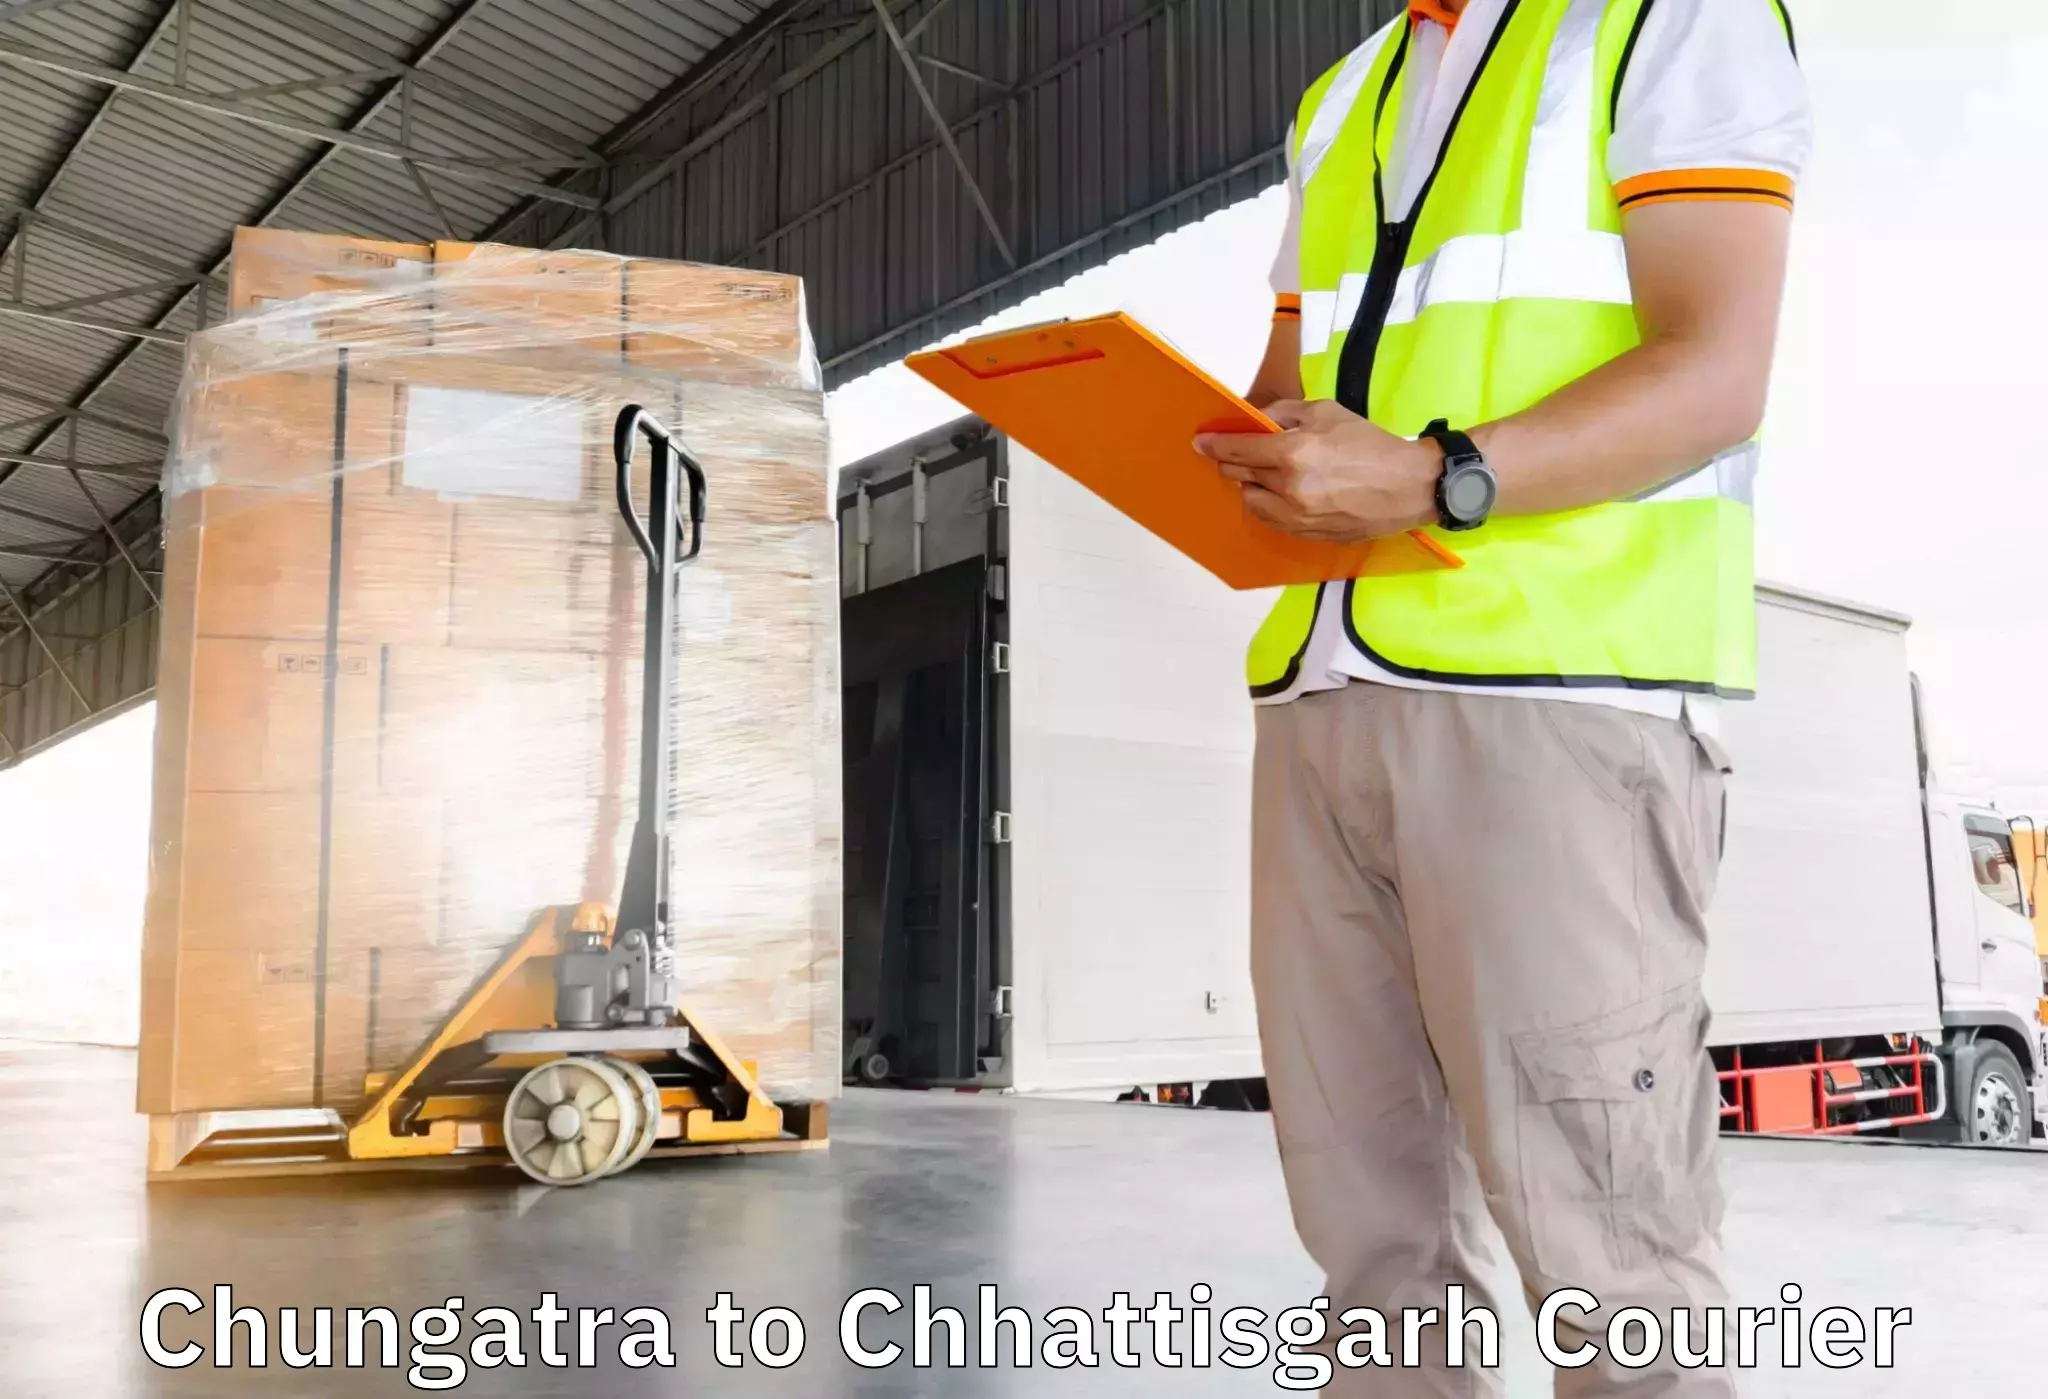 Moving and storage services in Chungatra to Sirpur